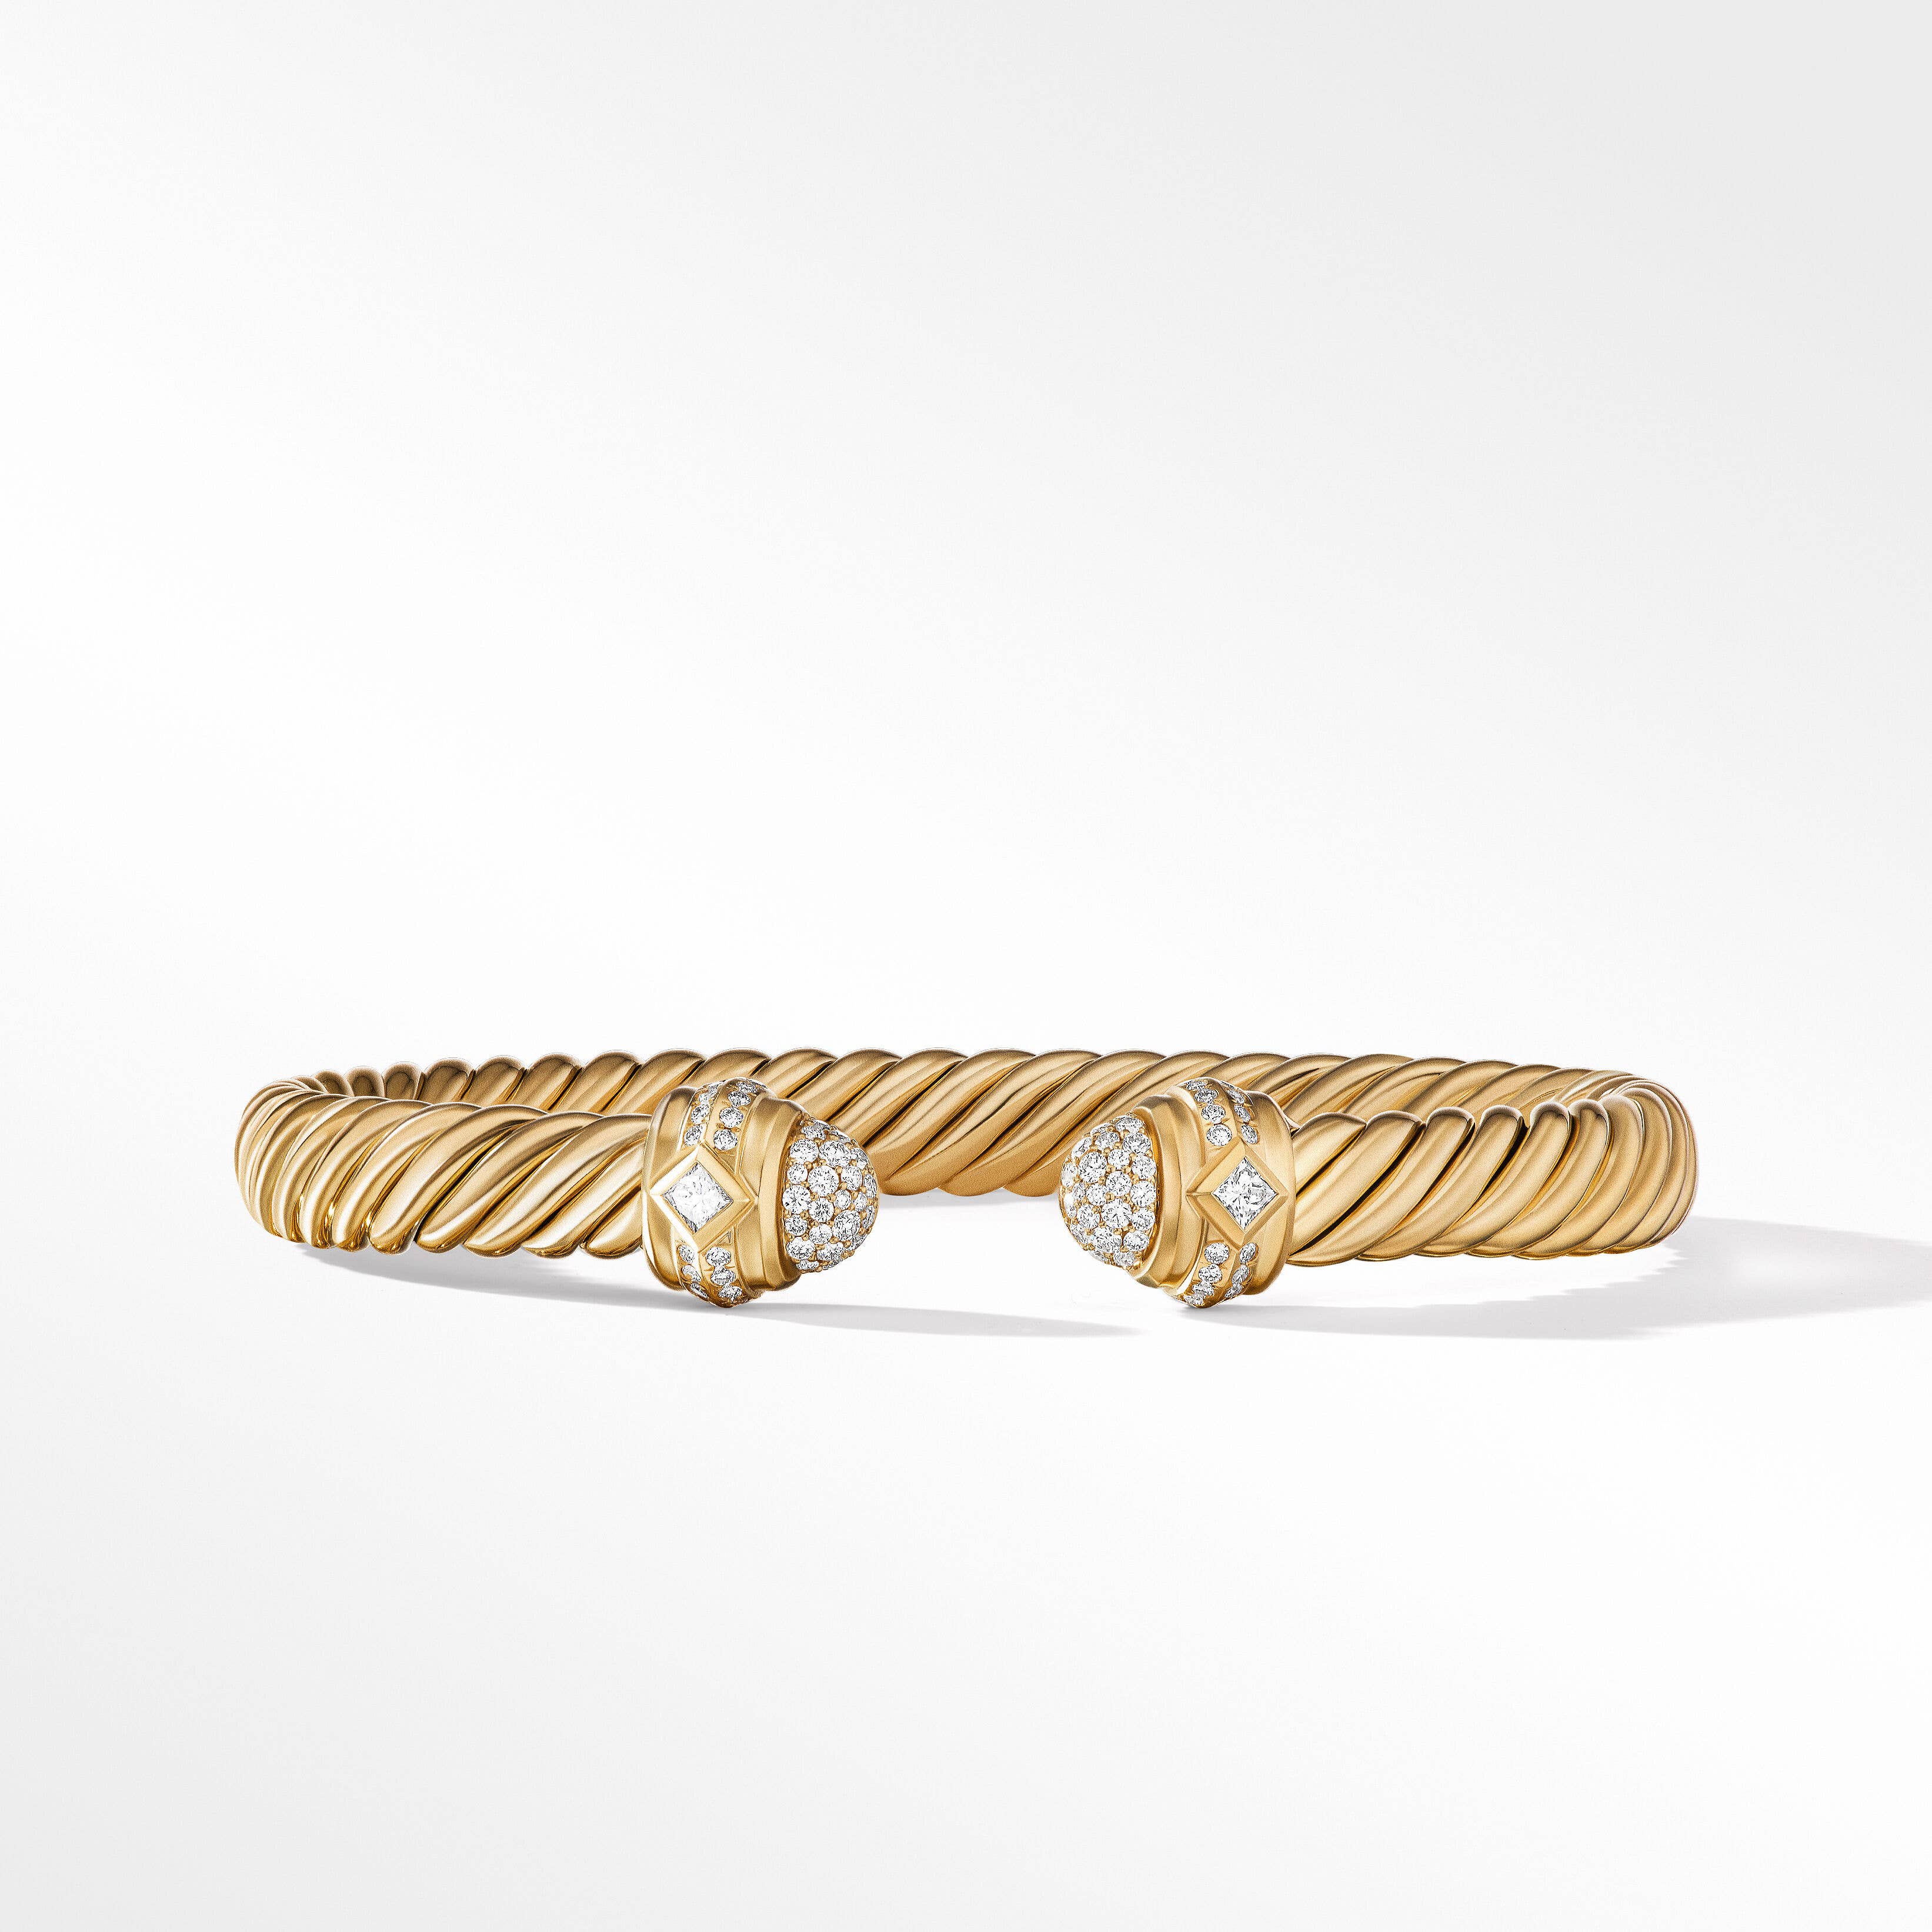 Cablespira® Oval Bracelet in 18K Yellow Gold with Diamonds